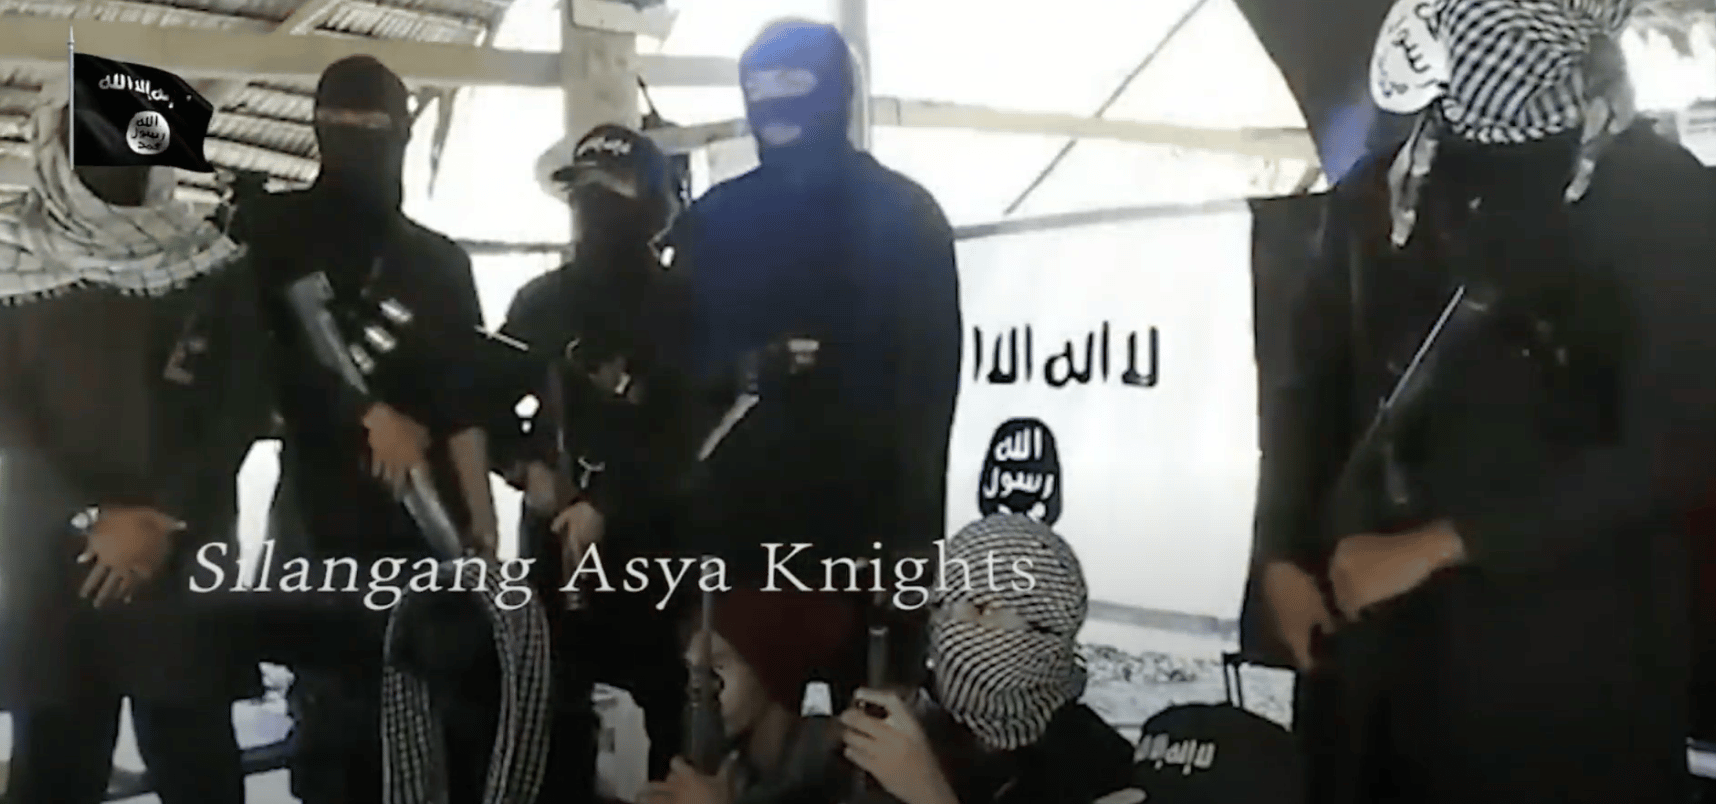 Unofficial Islamic State East Asia (ISEA) East Asia Knights Media Label: This Is Your Chance To Join Jihad in Luzon, Visayas or Mindanao [Philippines]